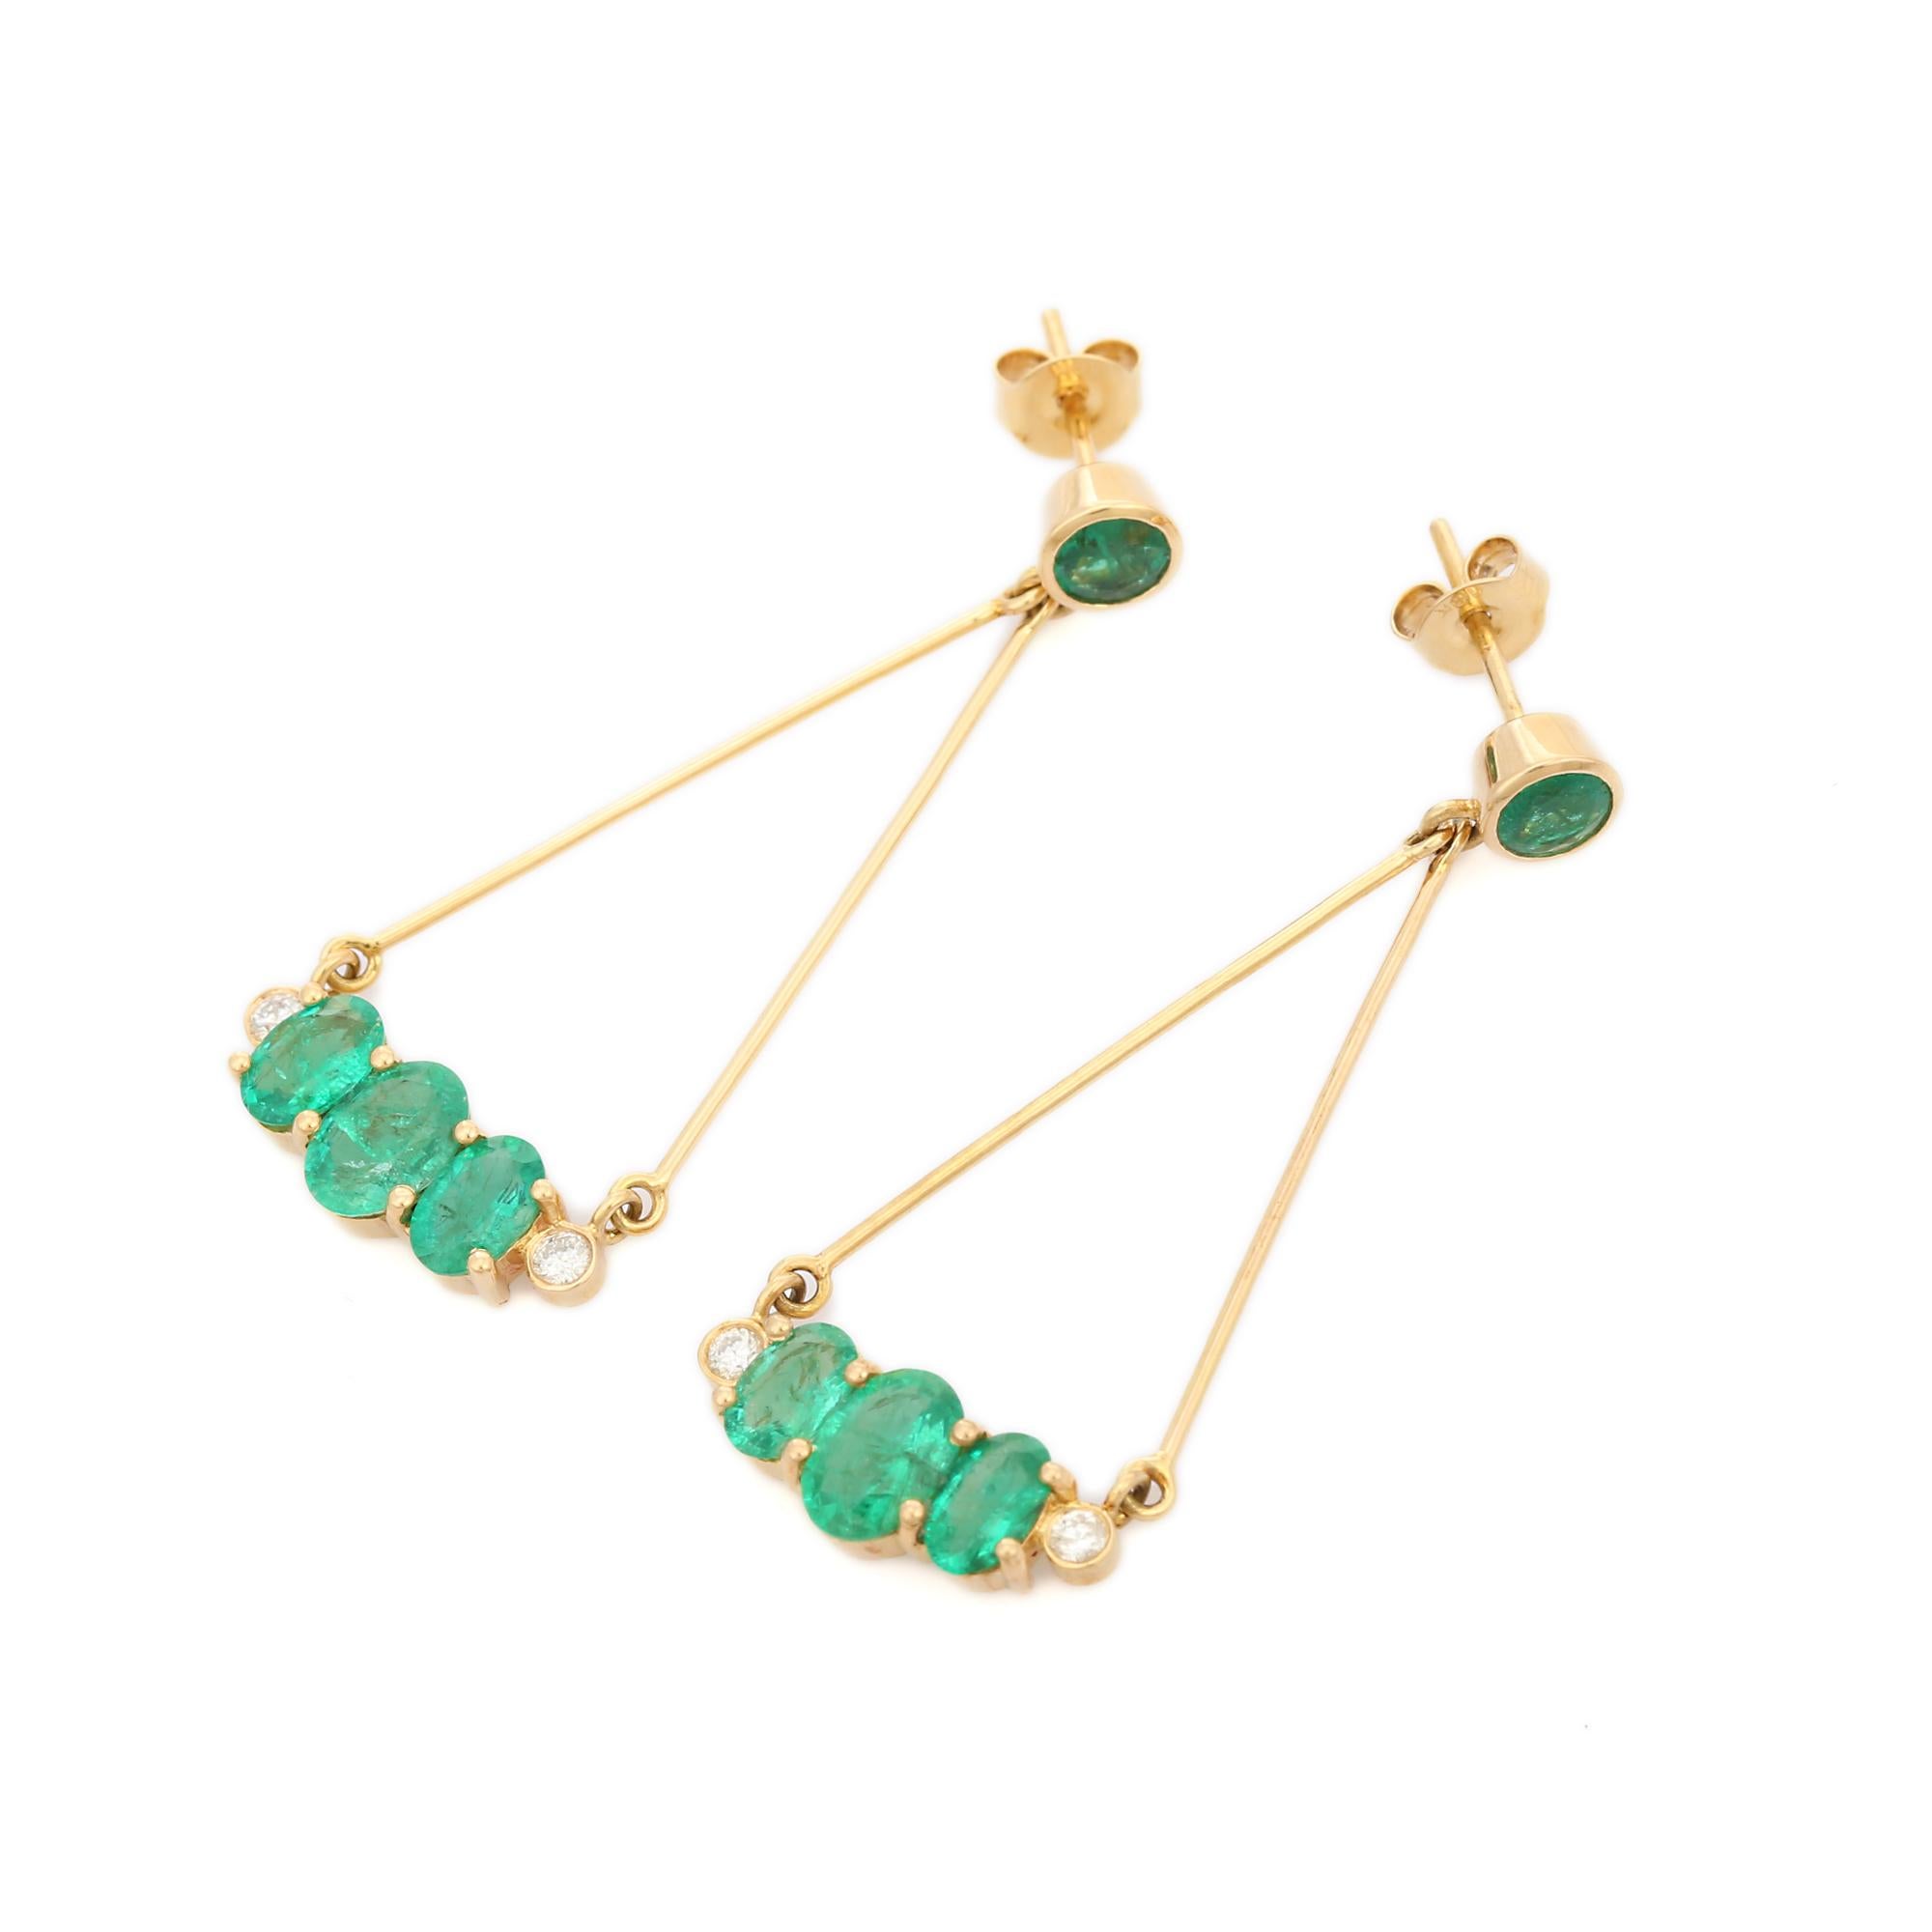 Stylish Emerald Diamond Dangle Earrings in 18K gold to make a statement with your look. These earrings create a sparkling, luxurious look featuring round cut emerald.
Emerald enhances the intellectual capacity of the person.
Designed with round cut